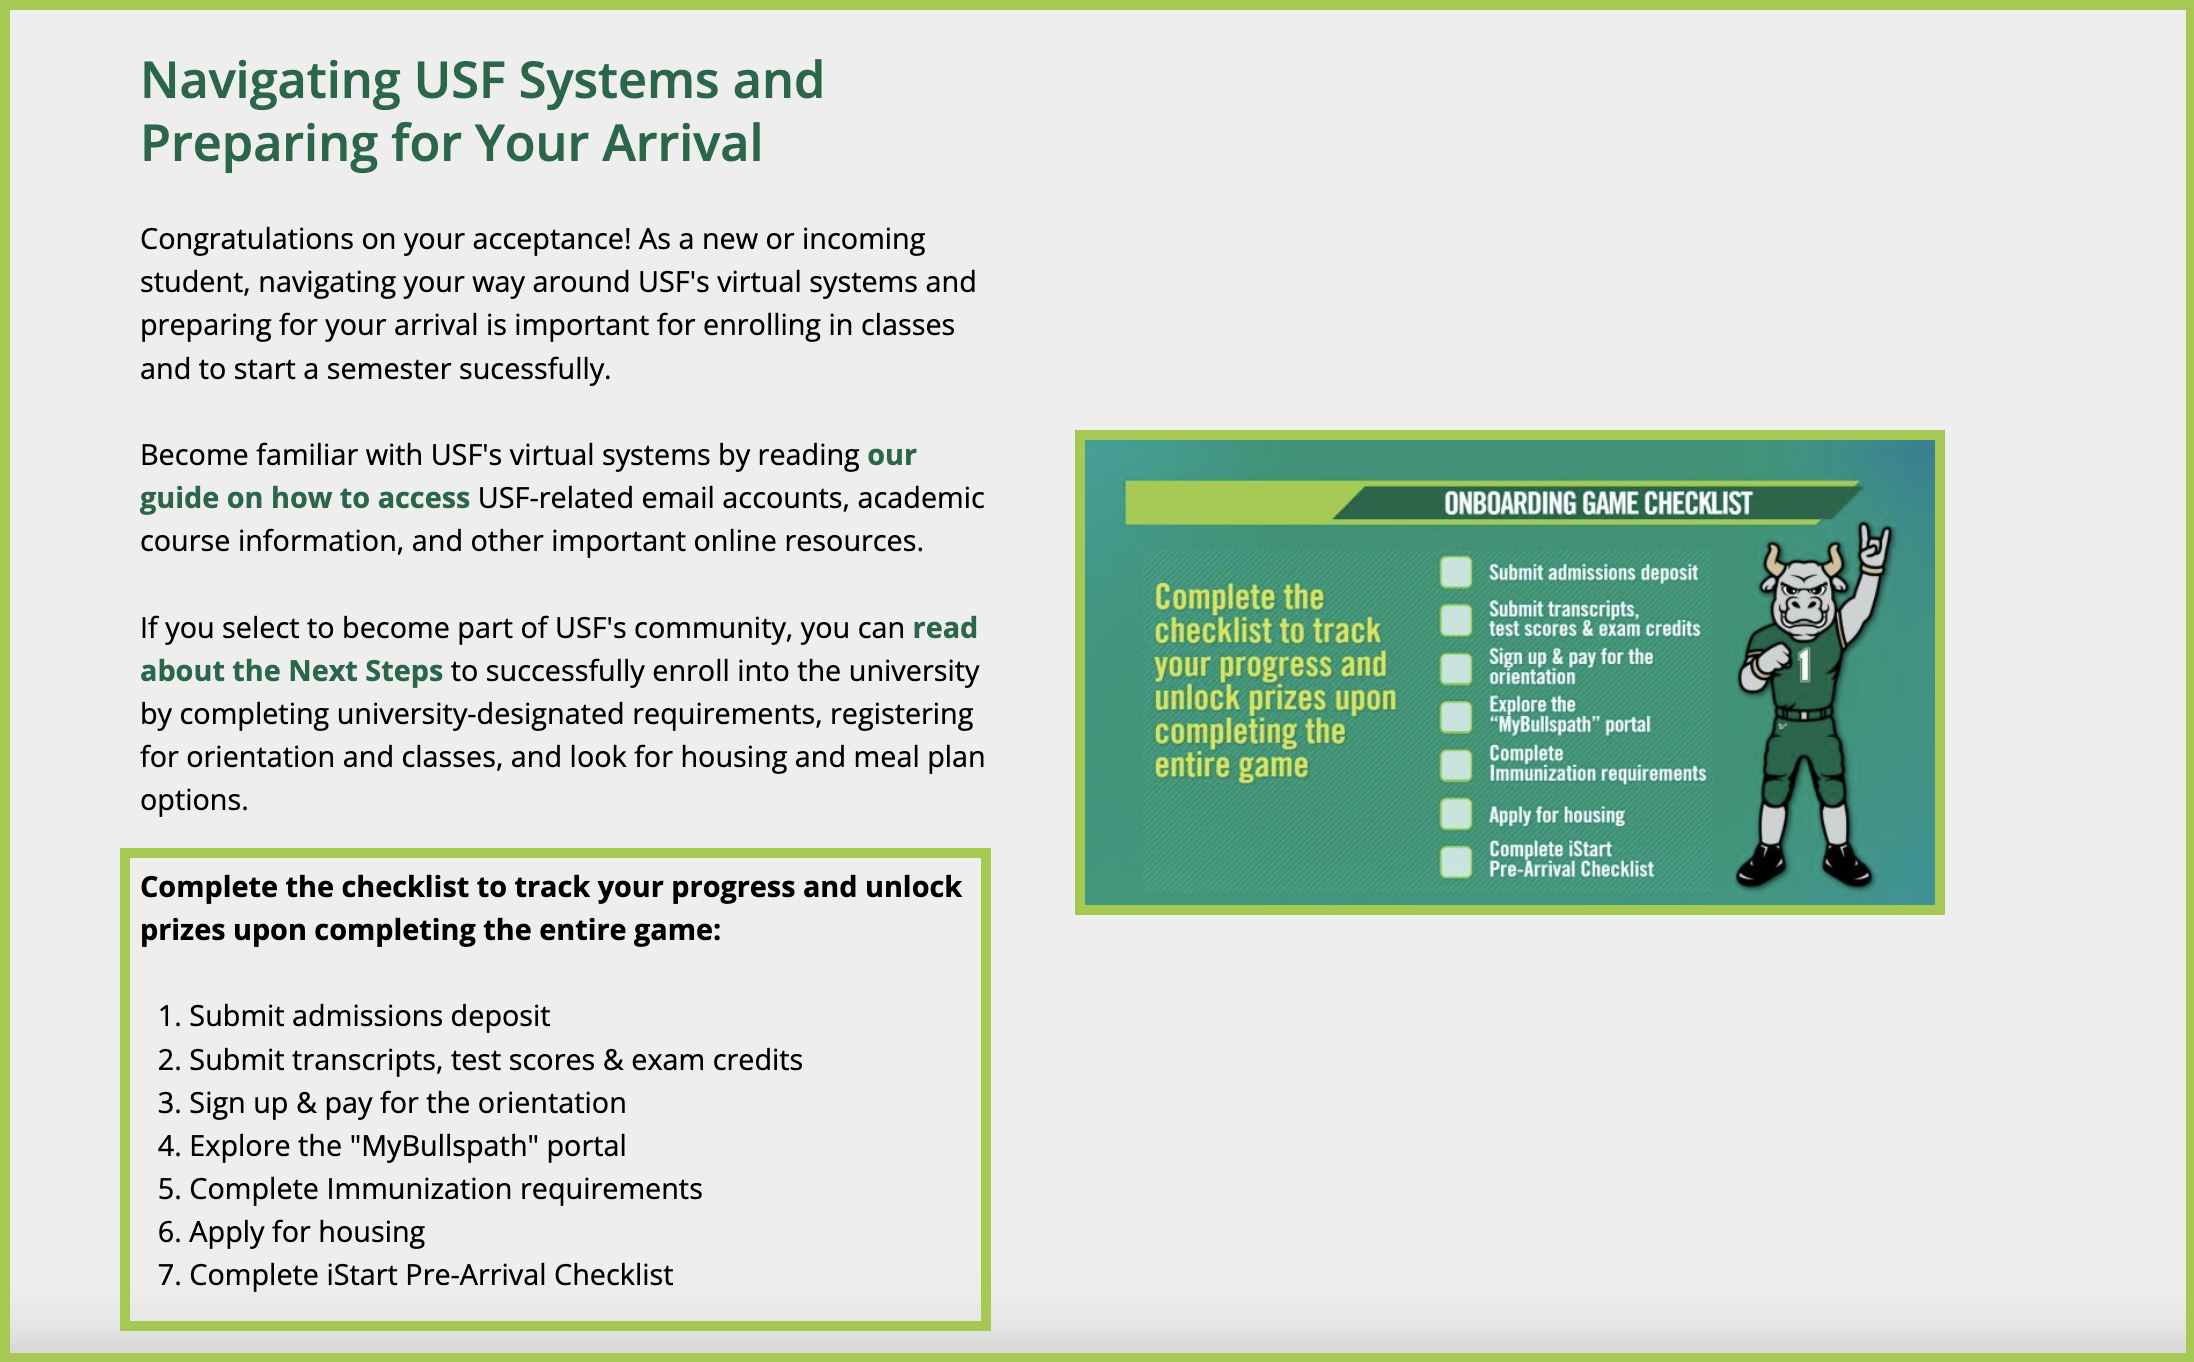 Navigating USF Systems and Preparing for Your Arrival - Extended description follows.